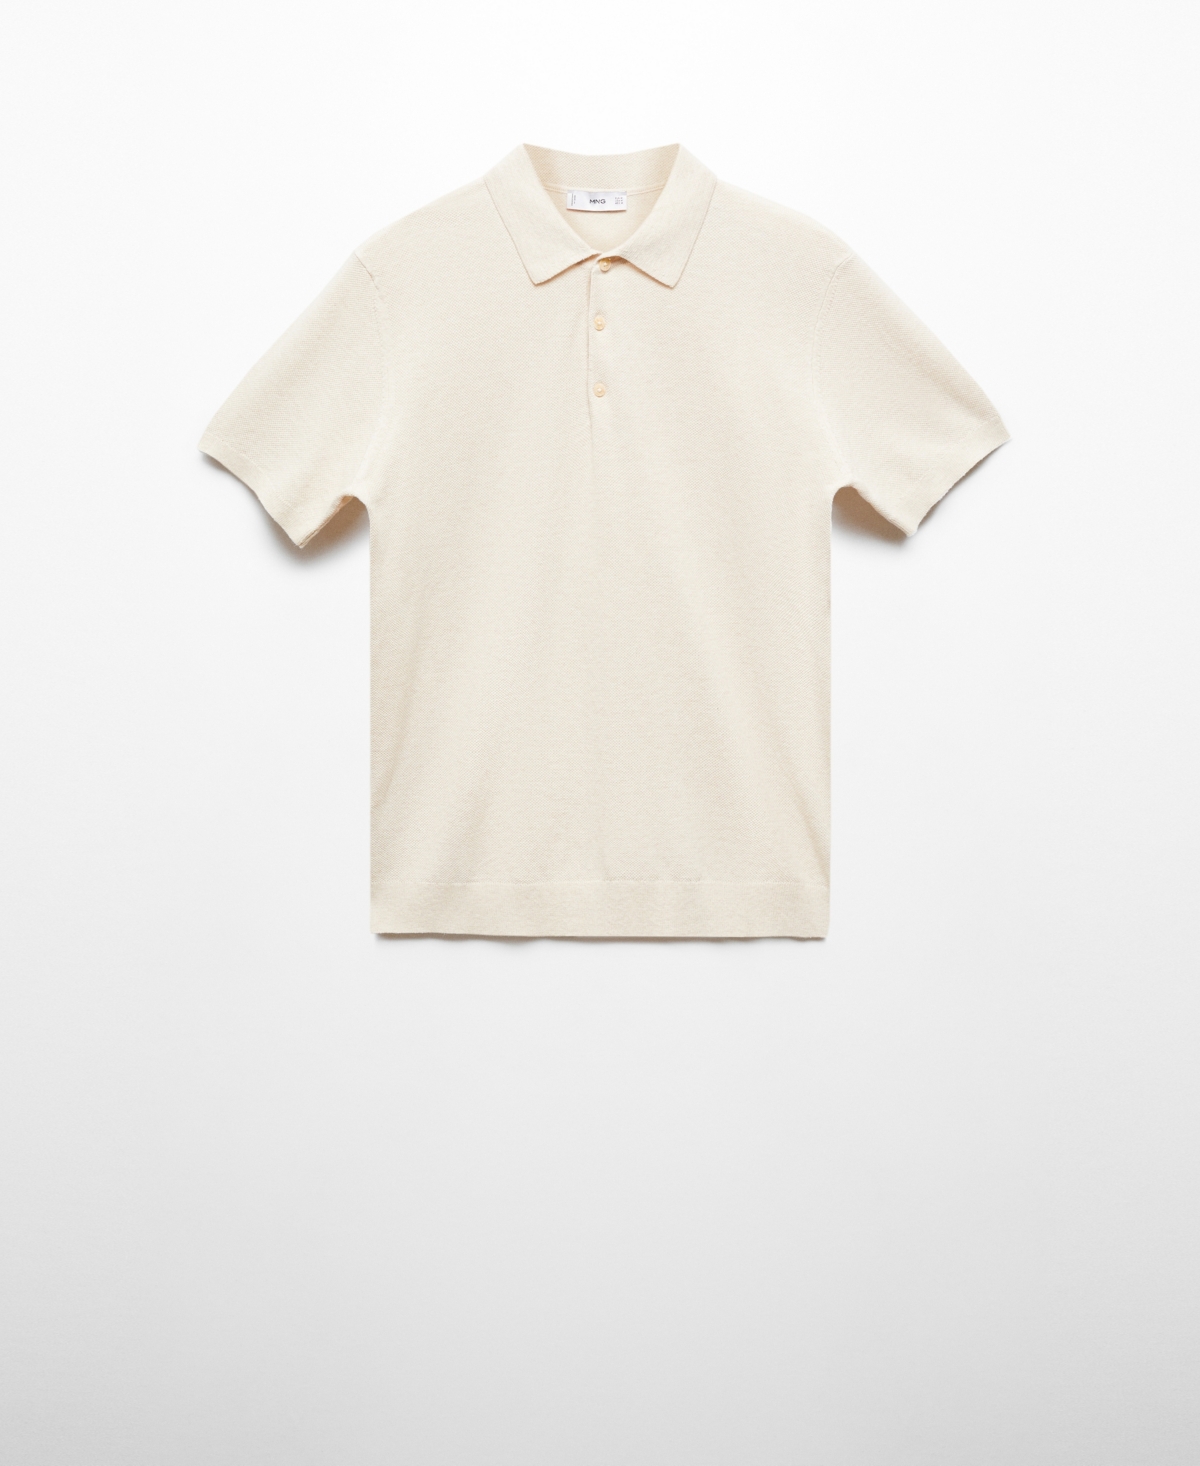 Mango Men's Short-sleeved Knitted Polo Shirt In Neutral